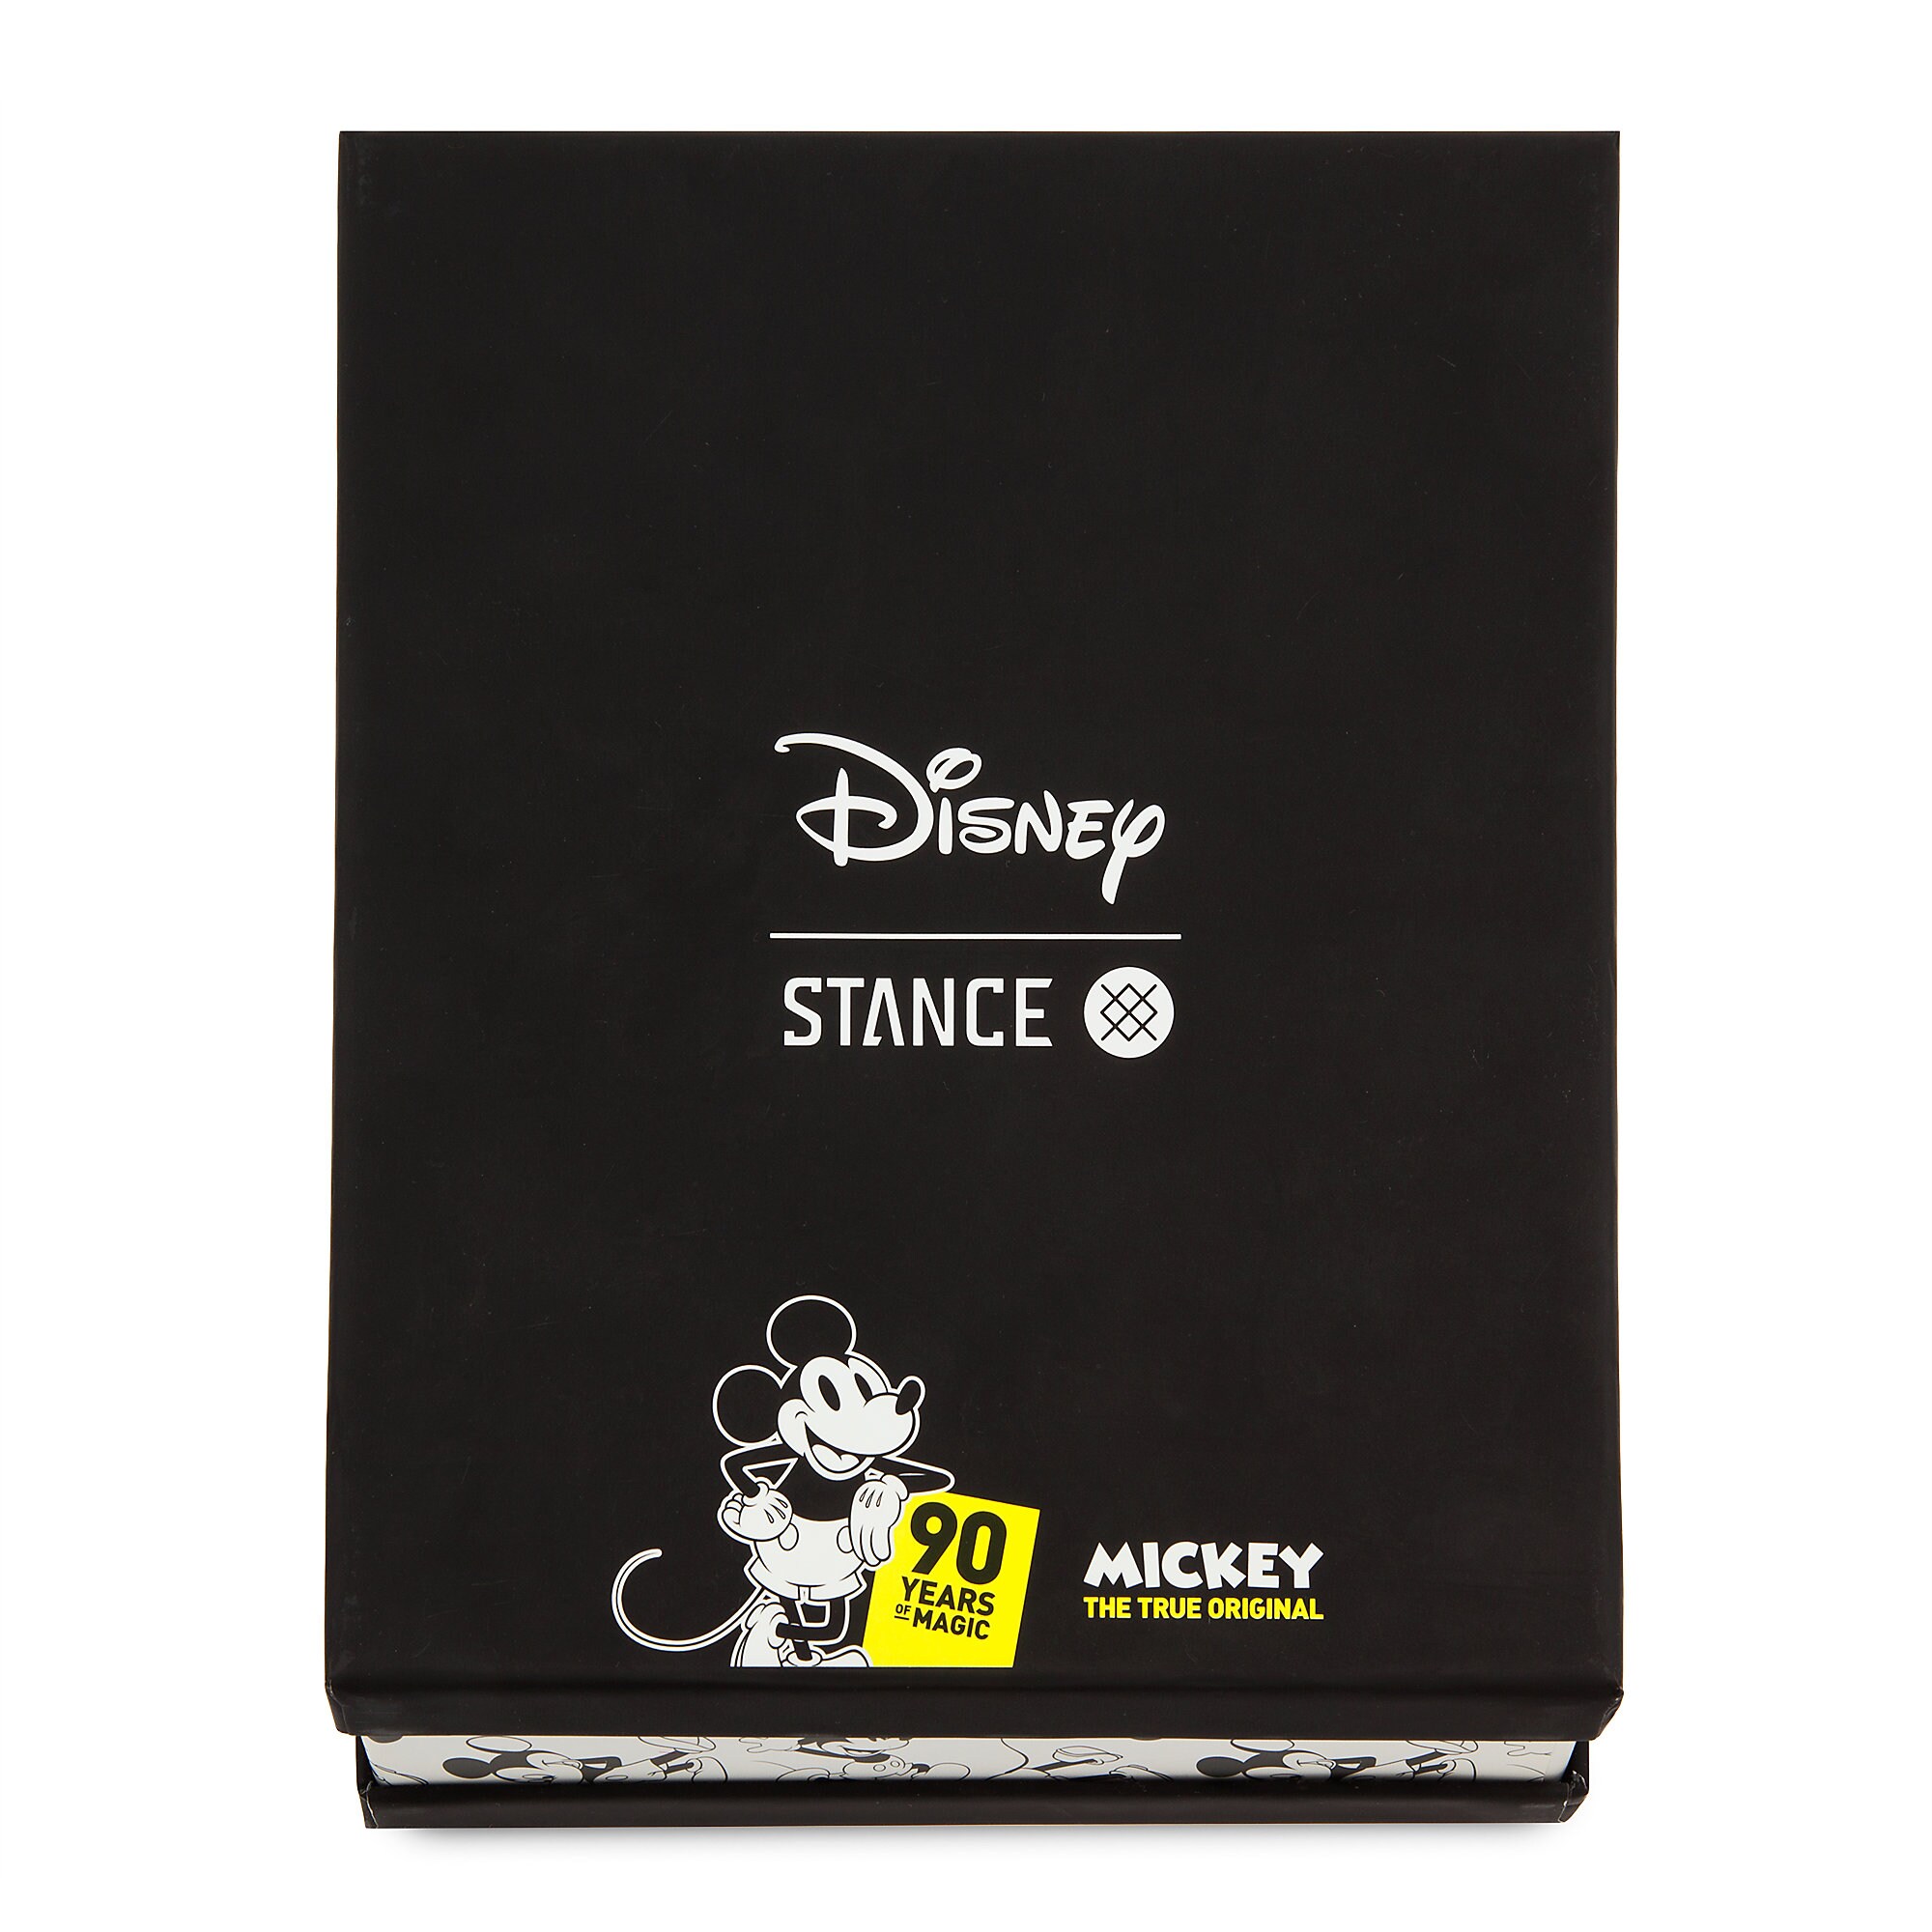 Mickey Mouse 90th Anniversary Socks and Pins Box Set by Stance